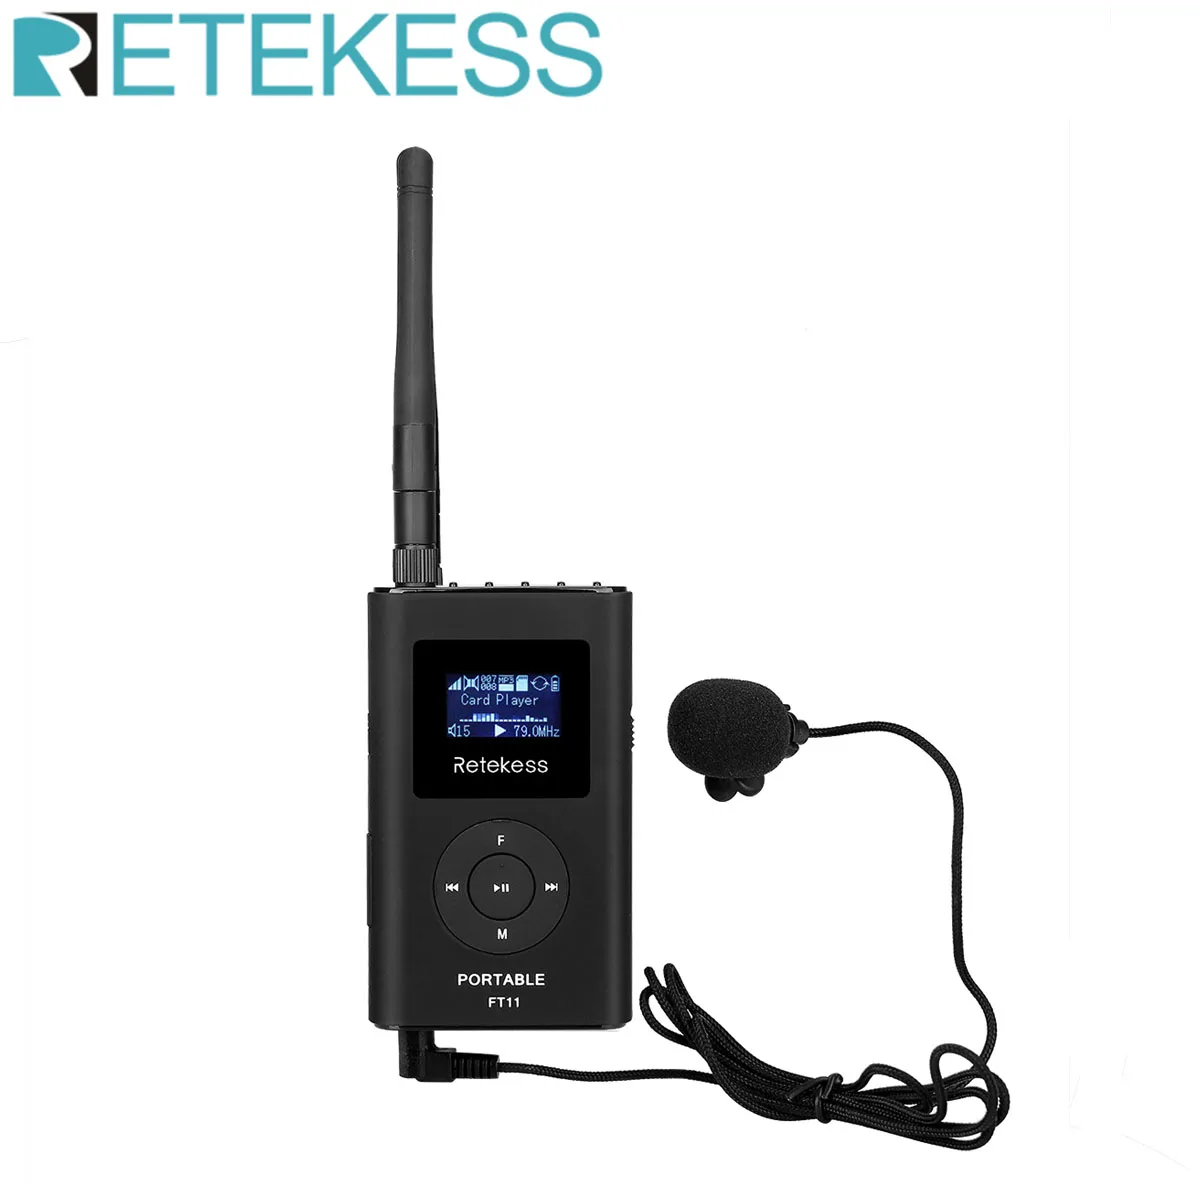 Retekess FT11 0.3W Wireless FM Broadcast Transmitter MP3 Portable for Church Car Meeting Support TF Card AUX Input